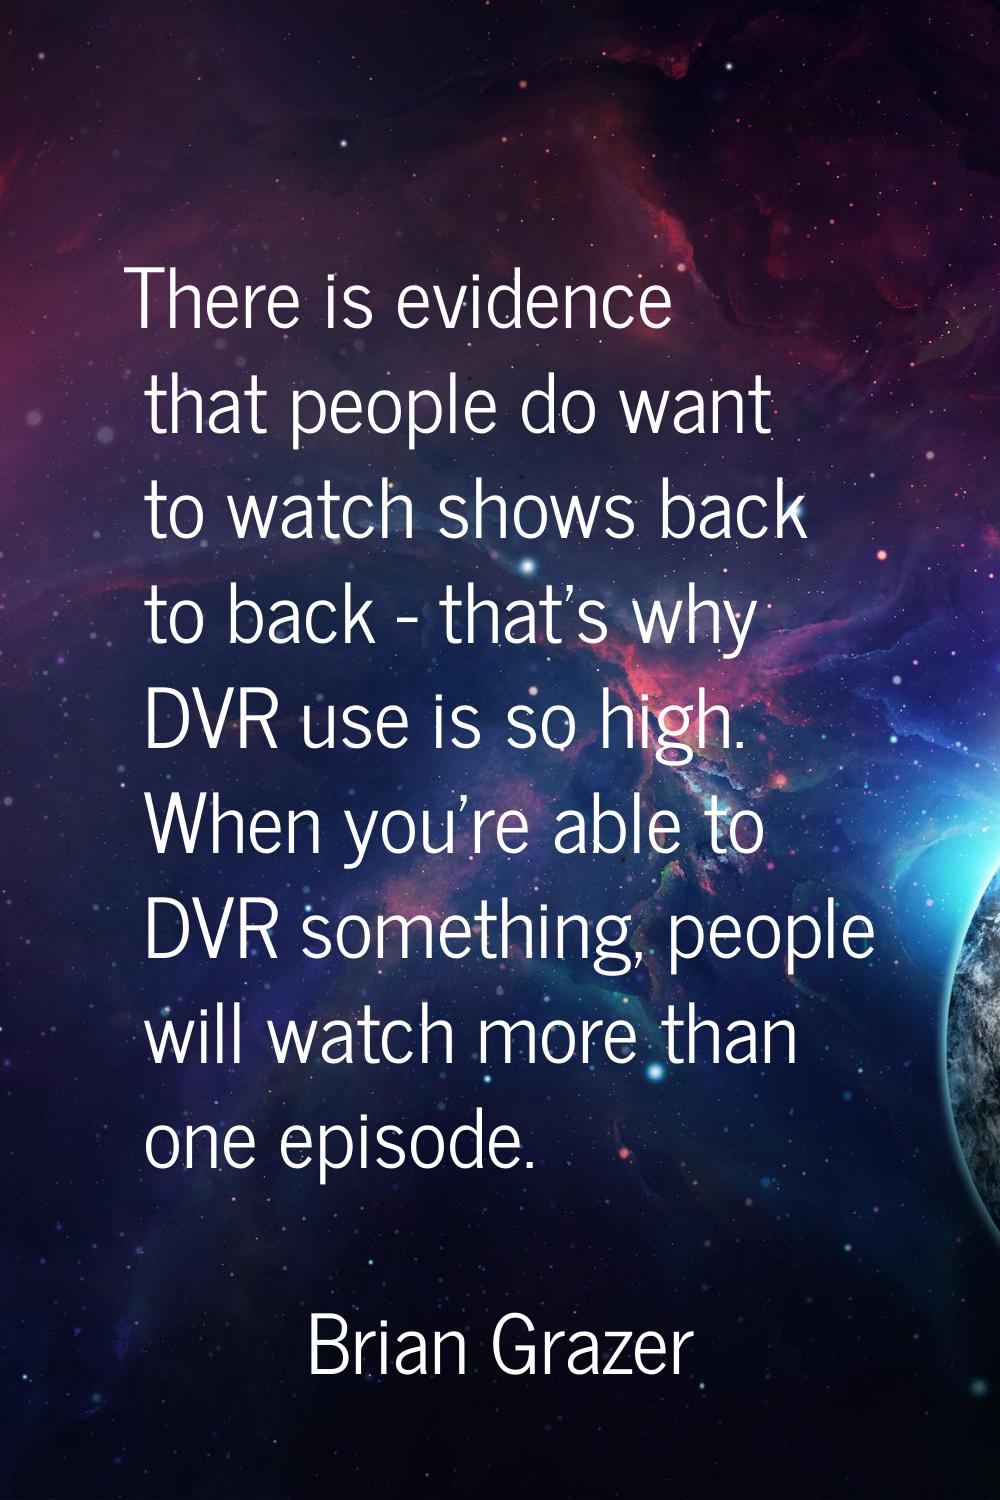 There is evidence that people do want to watch shows back to back - that's why DVR use is so high. 